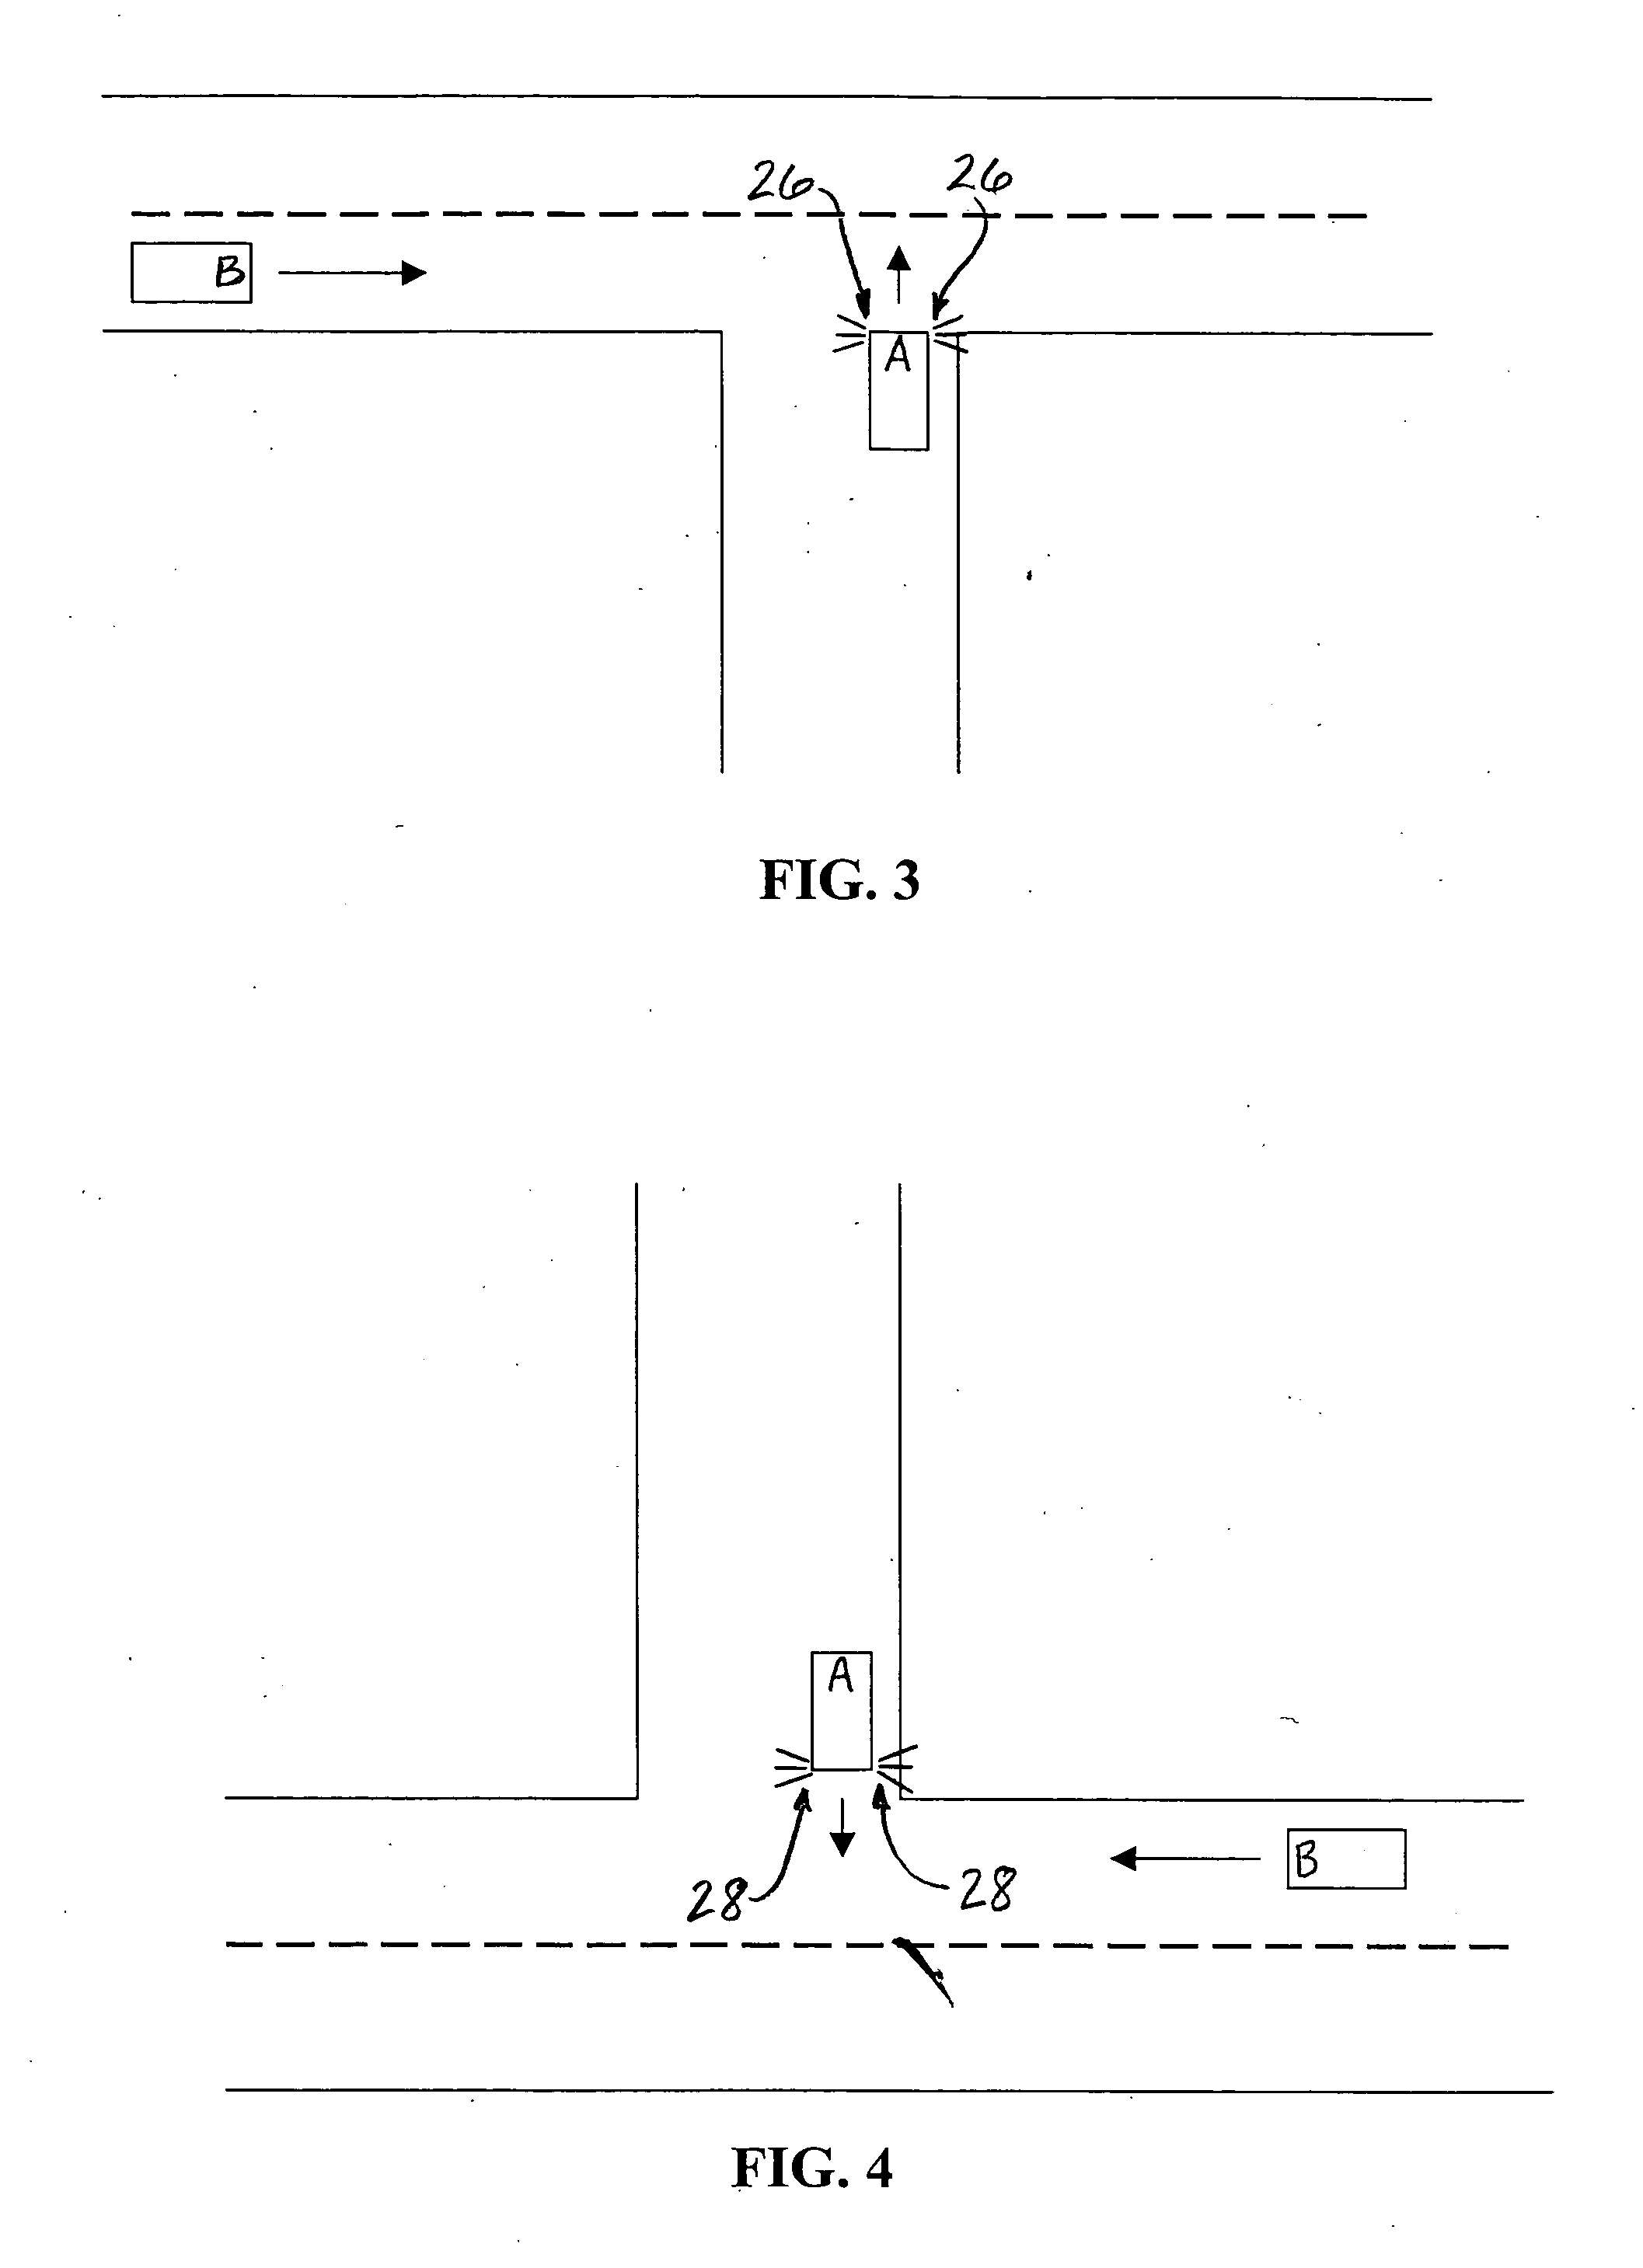 Initial movement indicator system and method for a wheeled ground vehicle